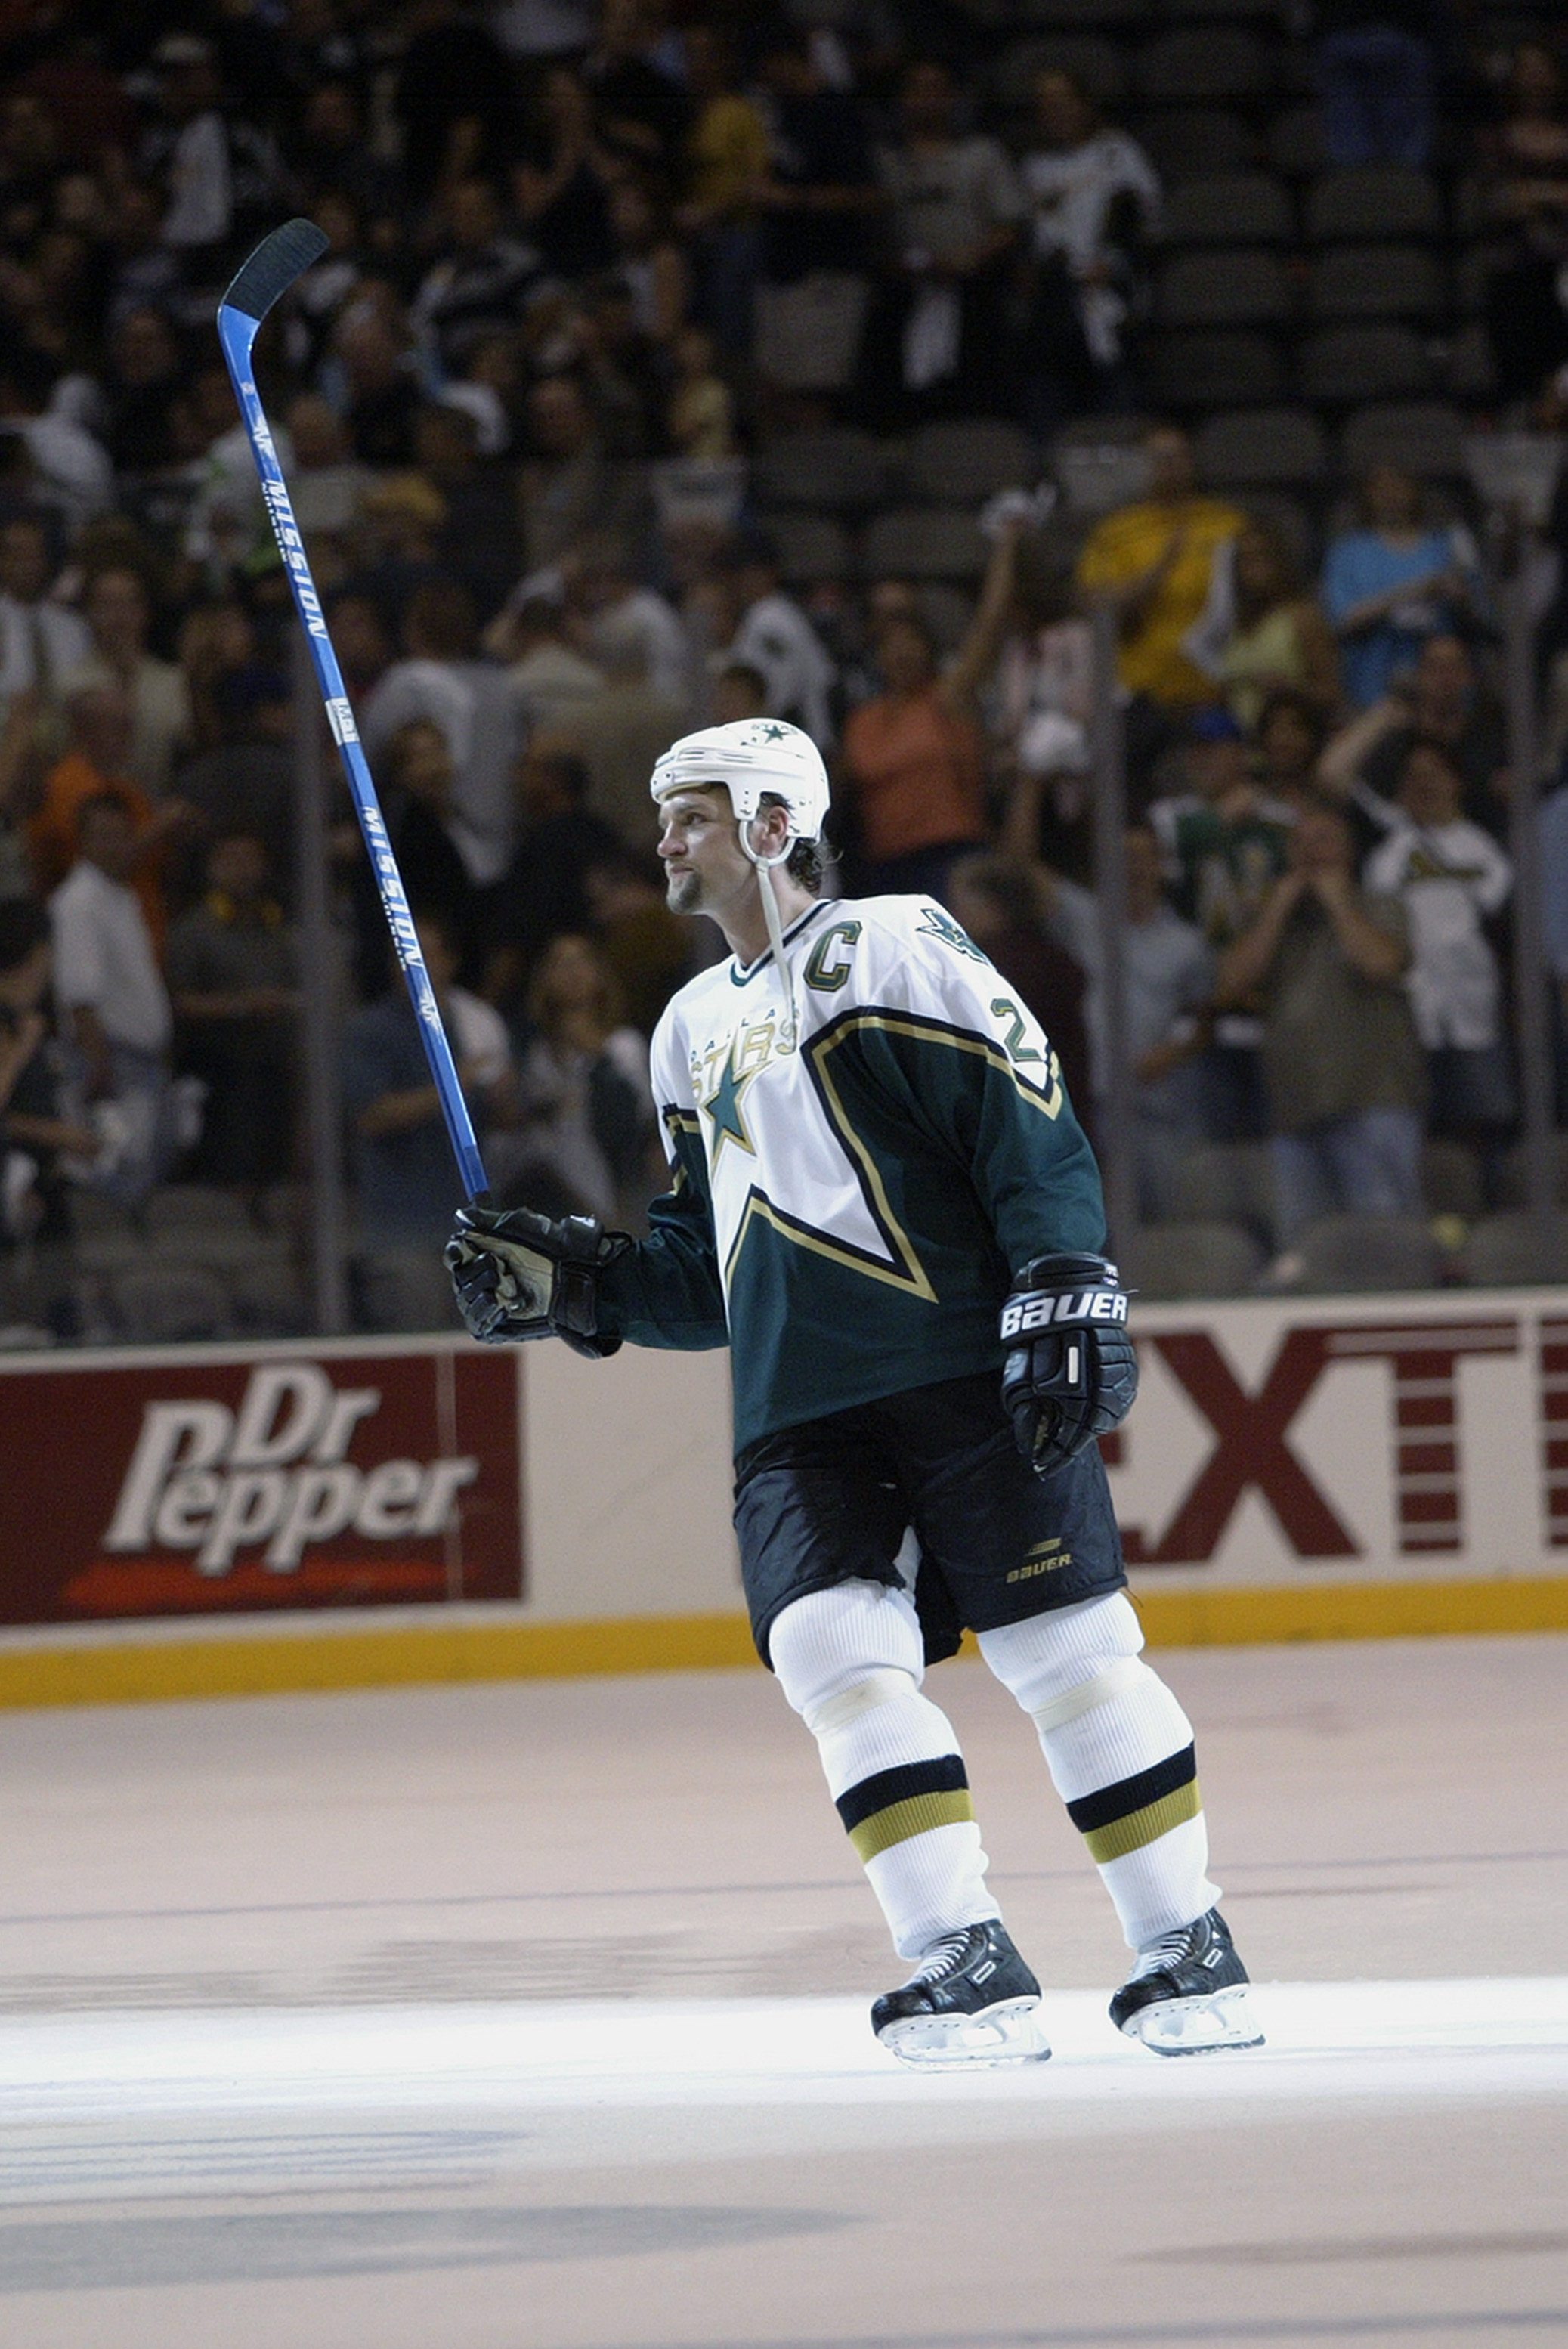 Derian Hatcher inducted into the DALLAS STARS HALL OF FAME 